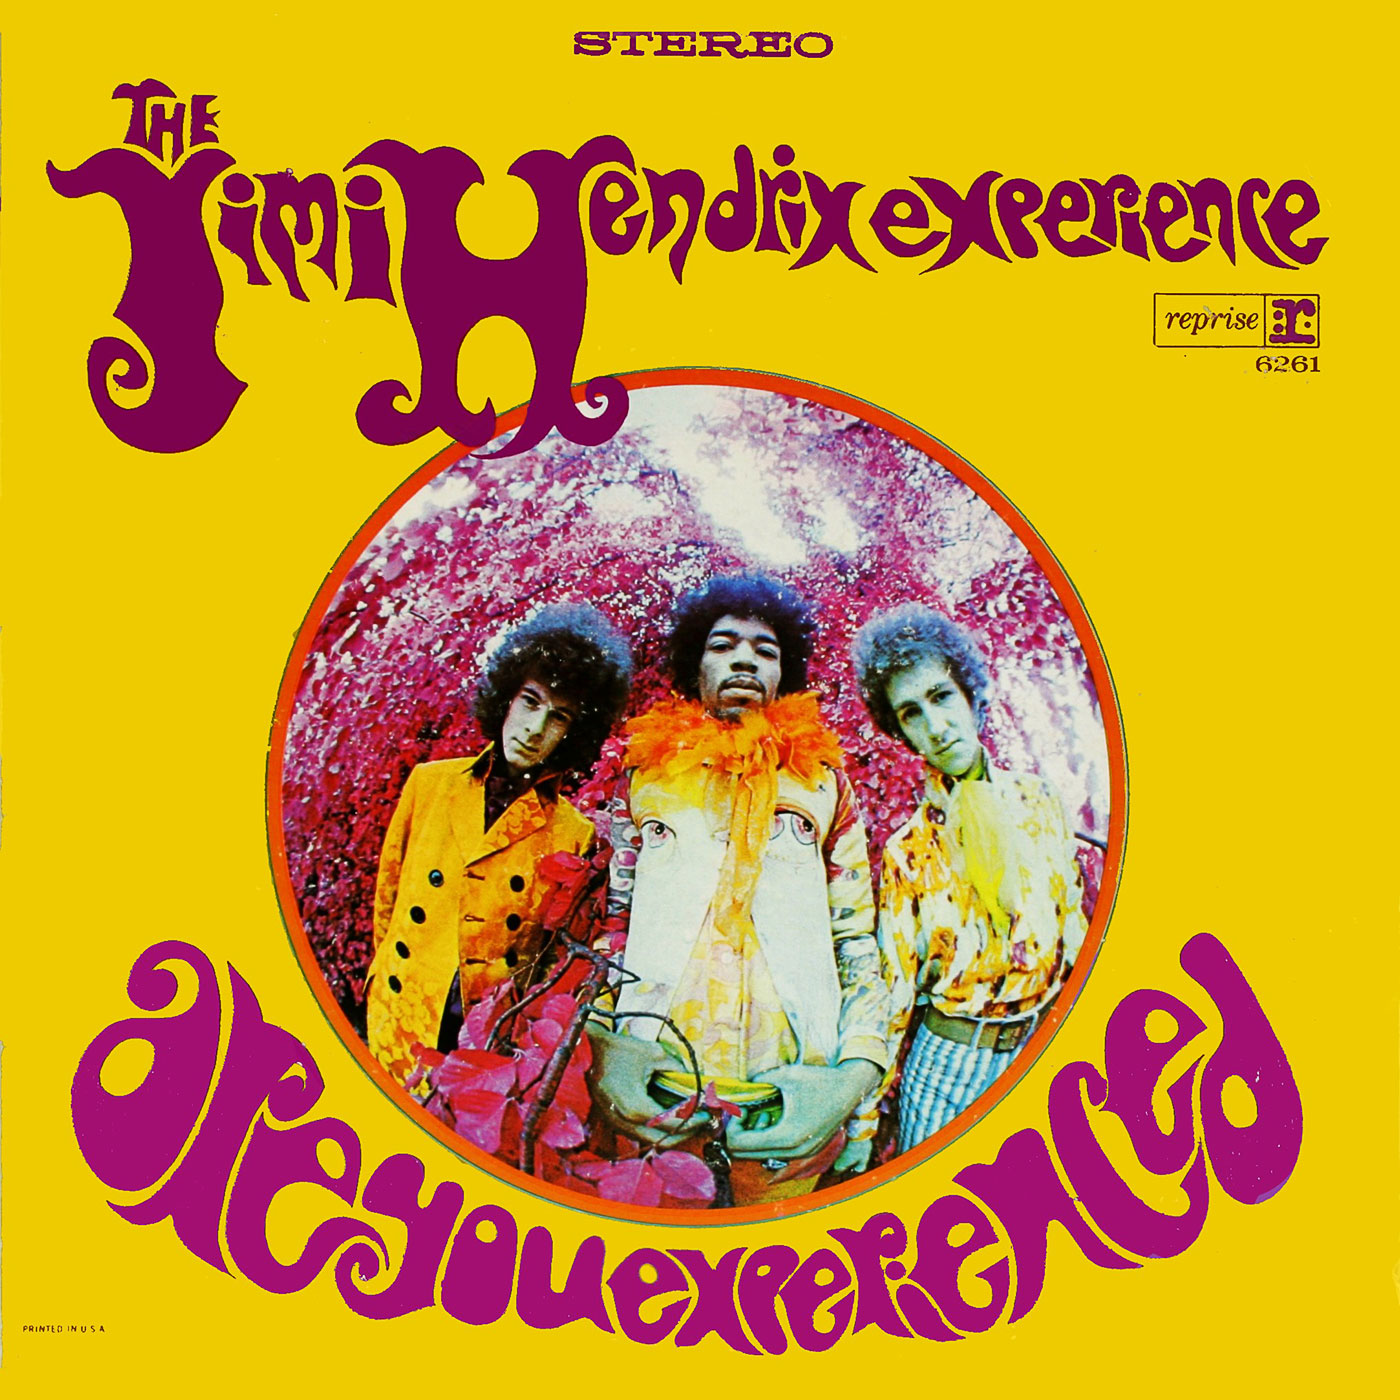 100 The Jimi Hendrix Experience – Are You Experienced?